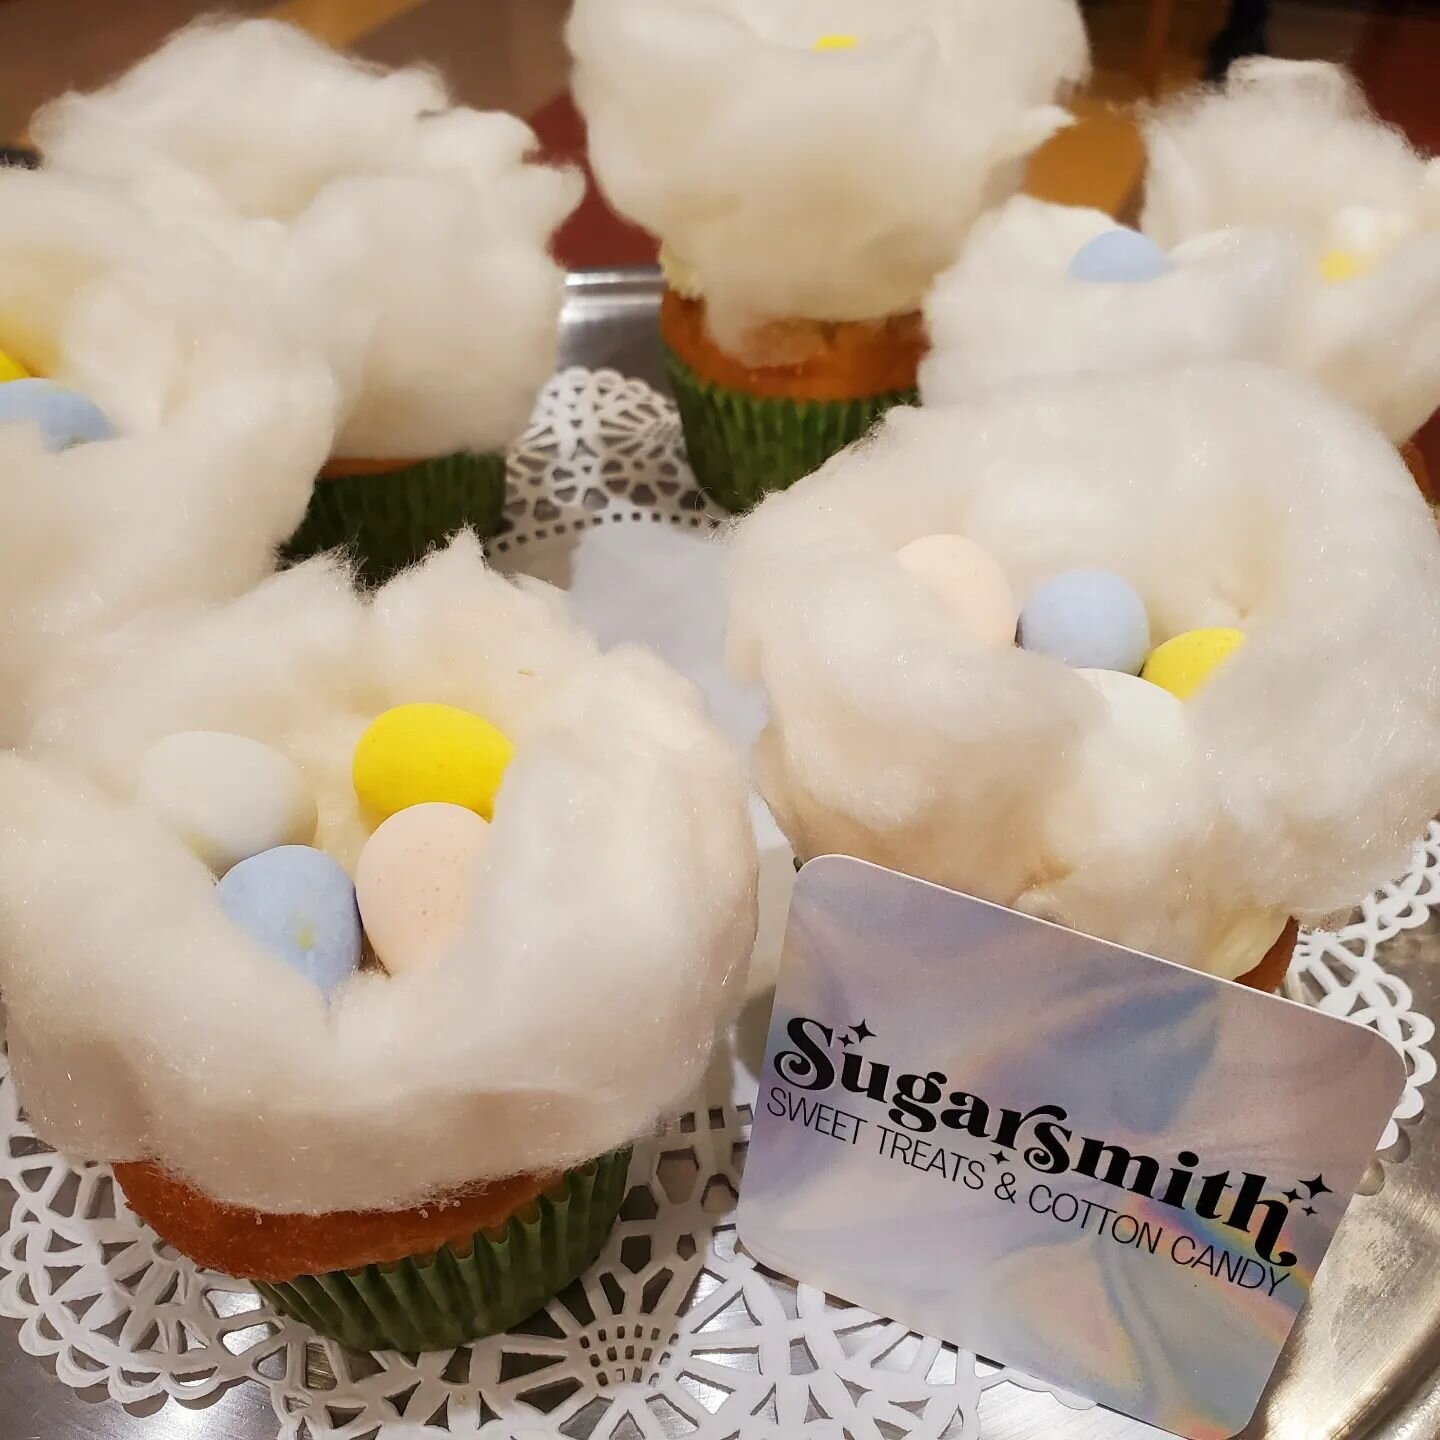 This past week I had the opportunity to bring a special Easter treat to @agrace_wisconsin. I volunteer one day a week in their cafe and love to help bring fun new ideas, whether it's a seasonal coffee drink special or, in this case cotton candy cupca